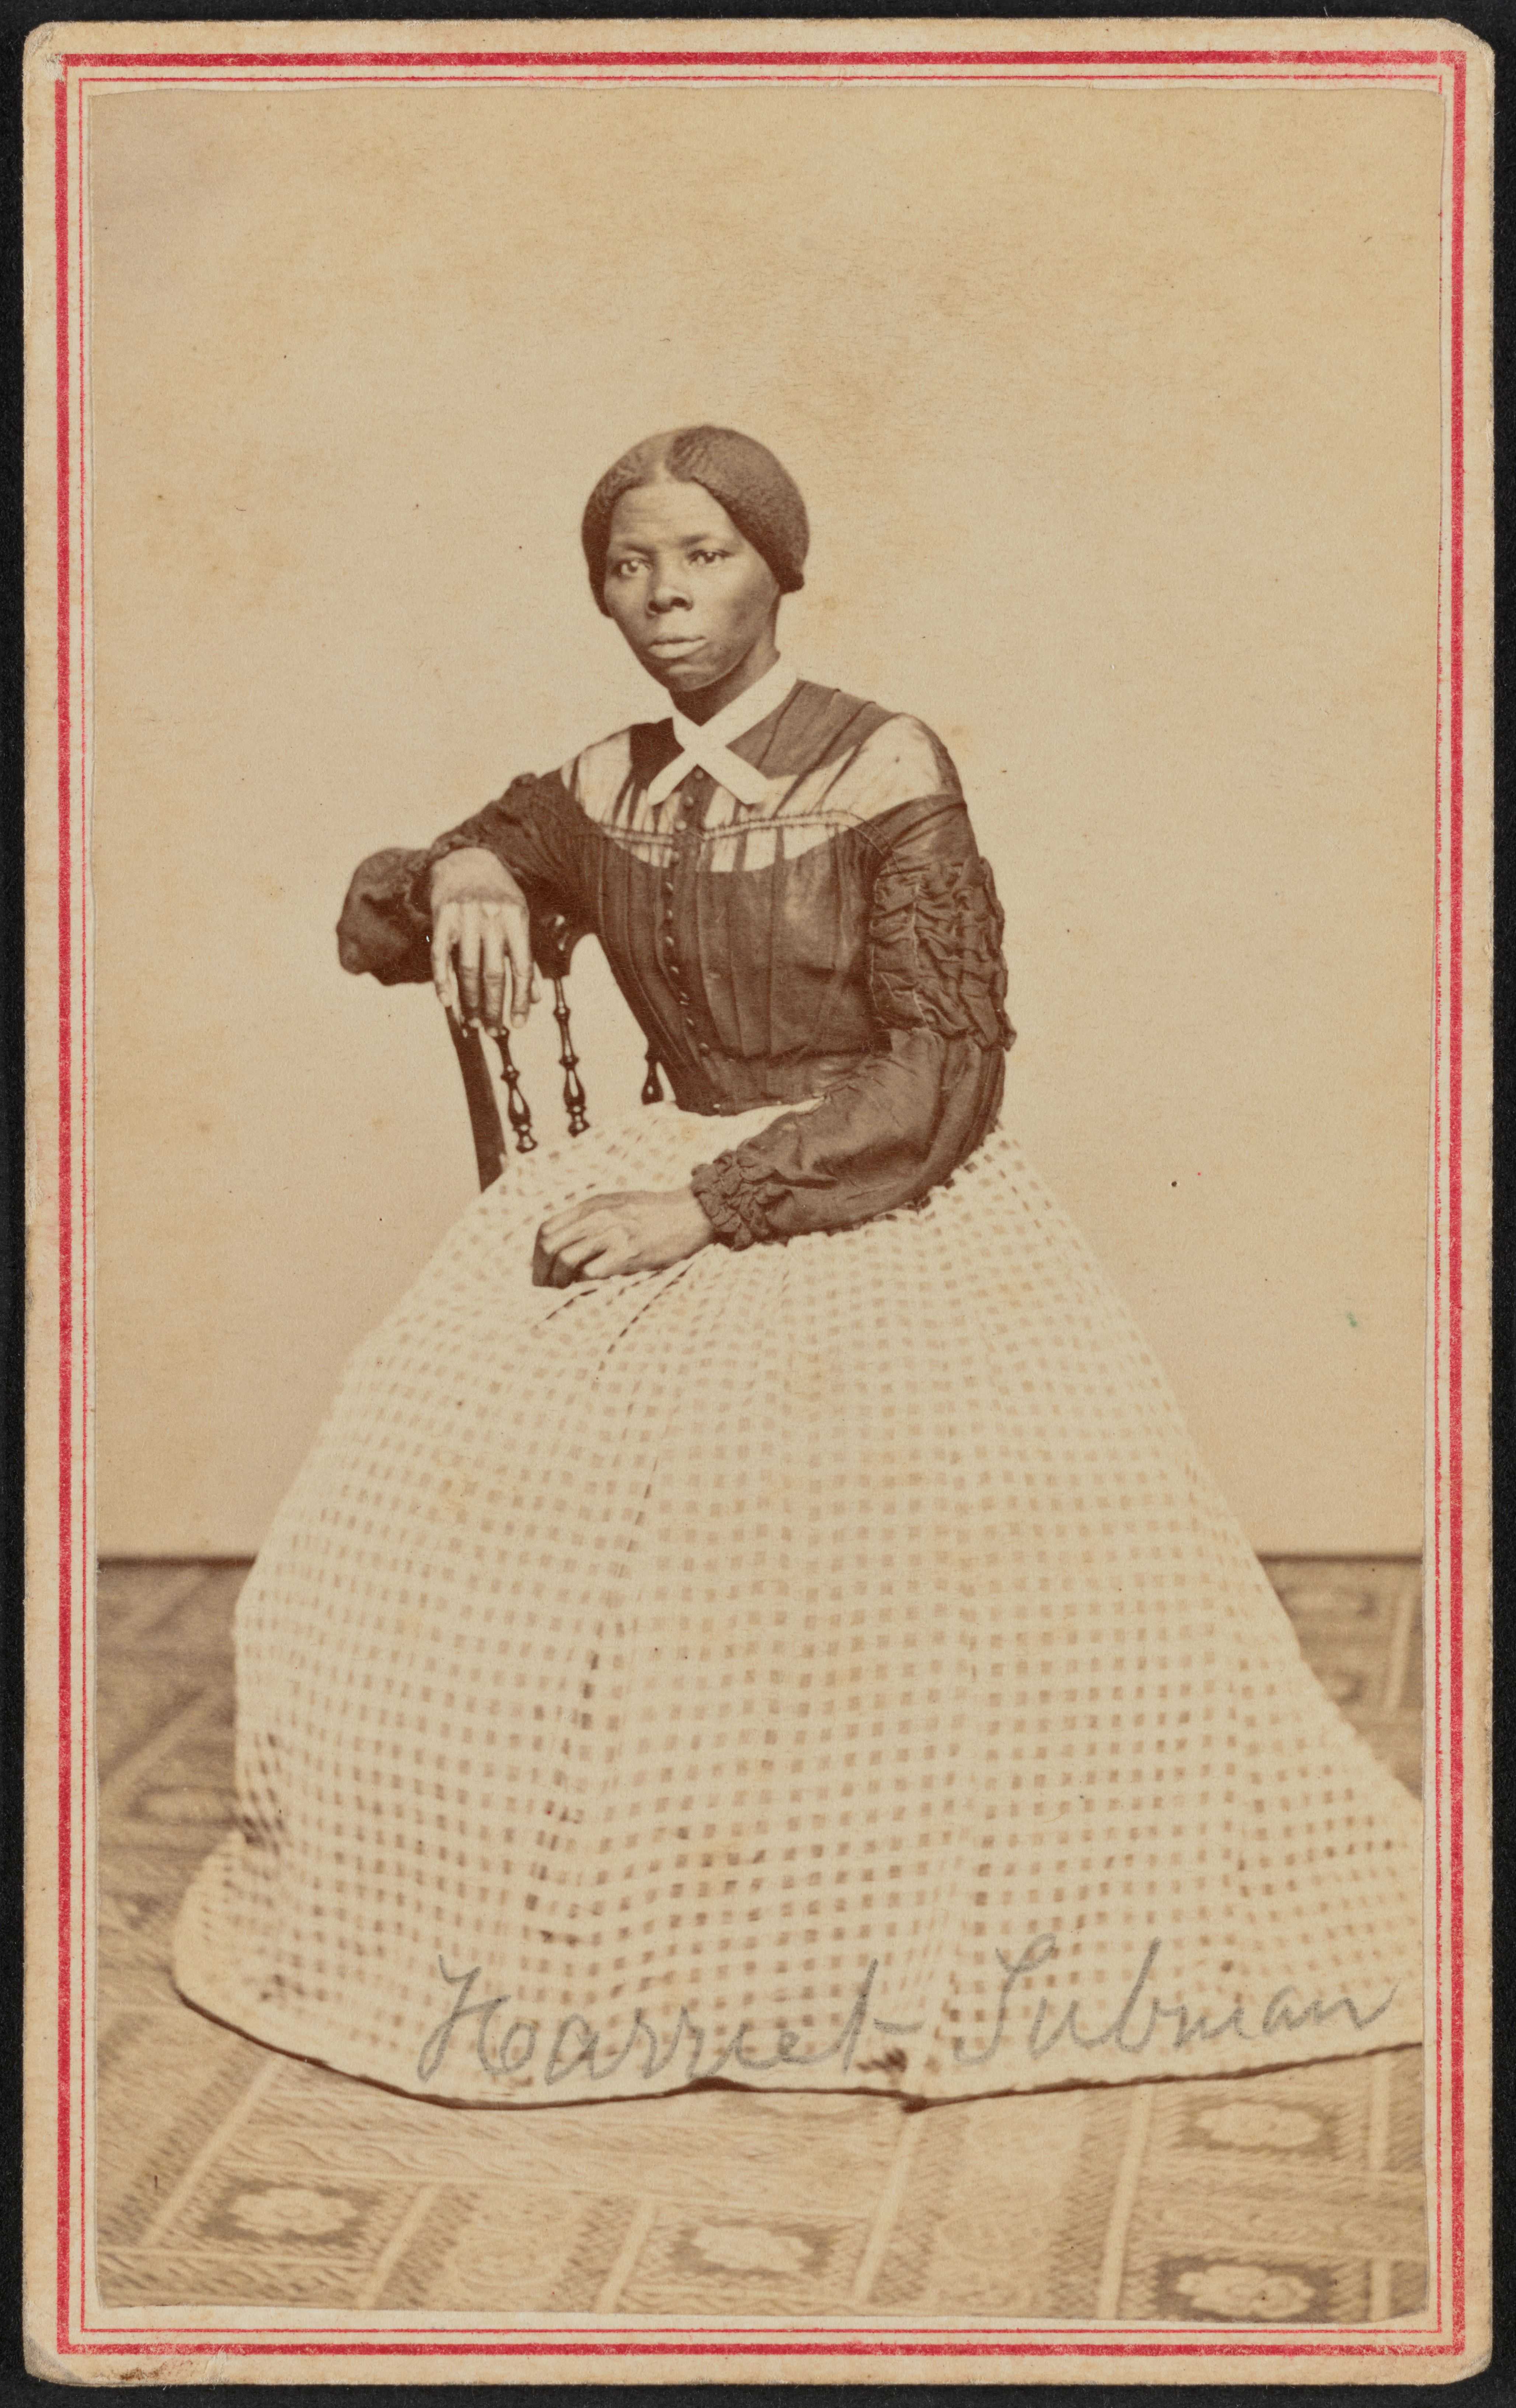 A carte-de-visite of Harriet Tubman seated in an interior room. She is positioned slightly turned to the right and gazes off camera.